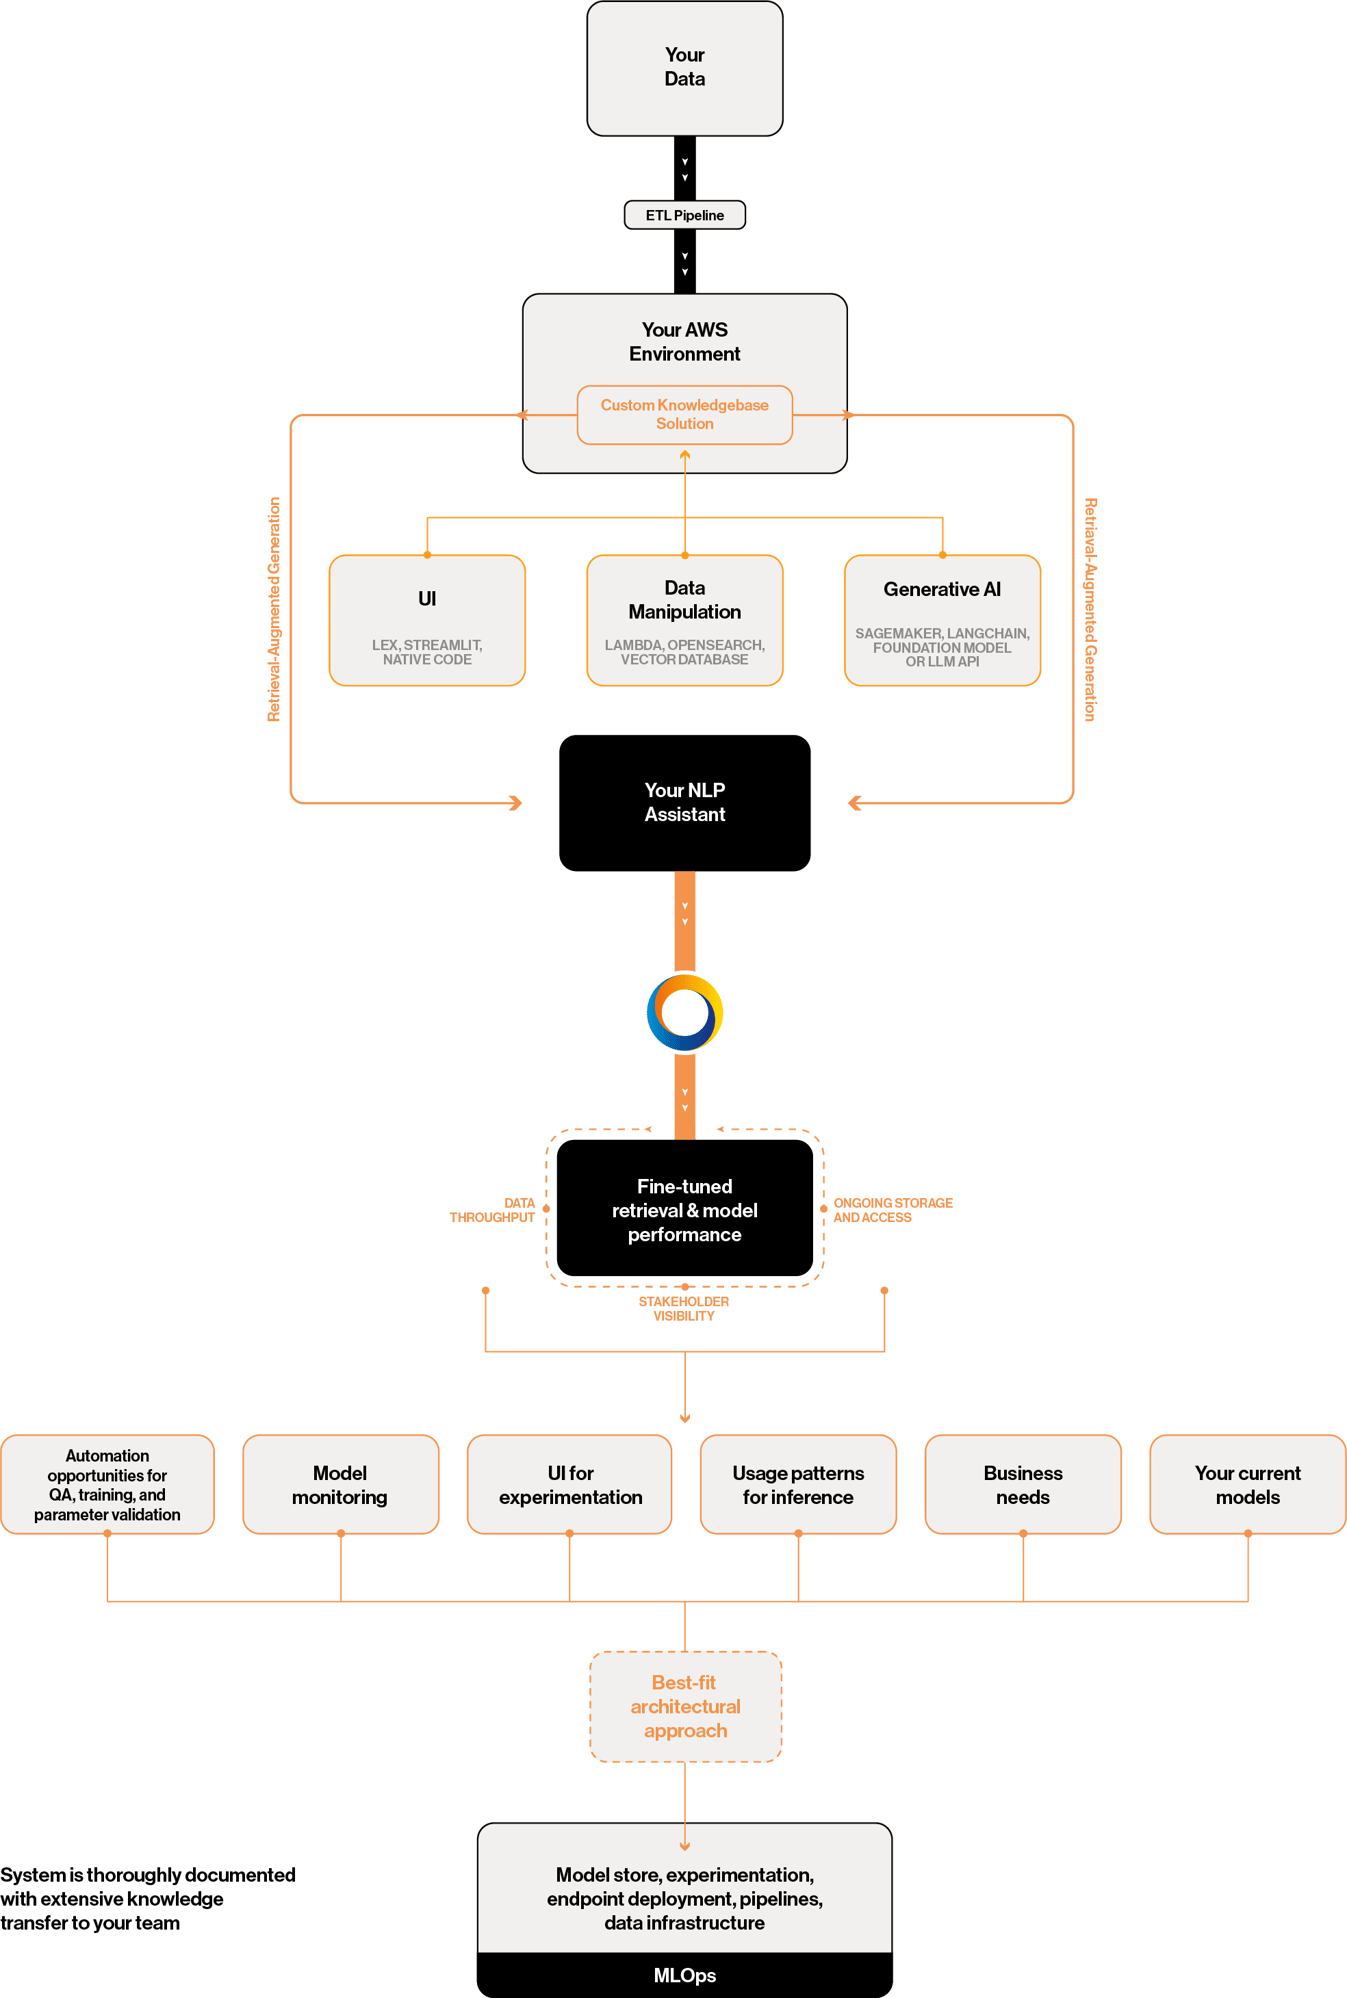 Gen AI Use Case flow_Knowledge Mgmt 2.0